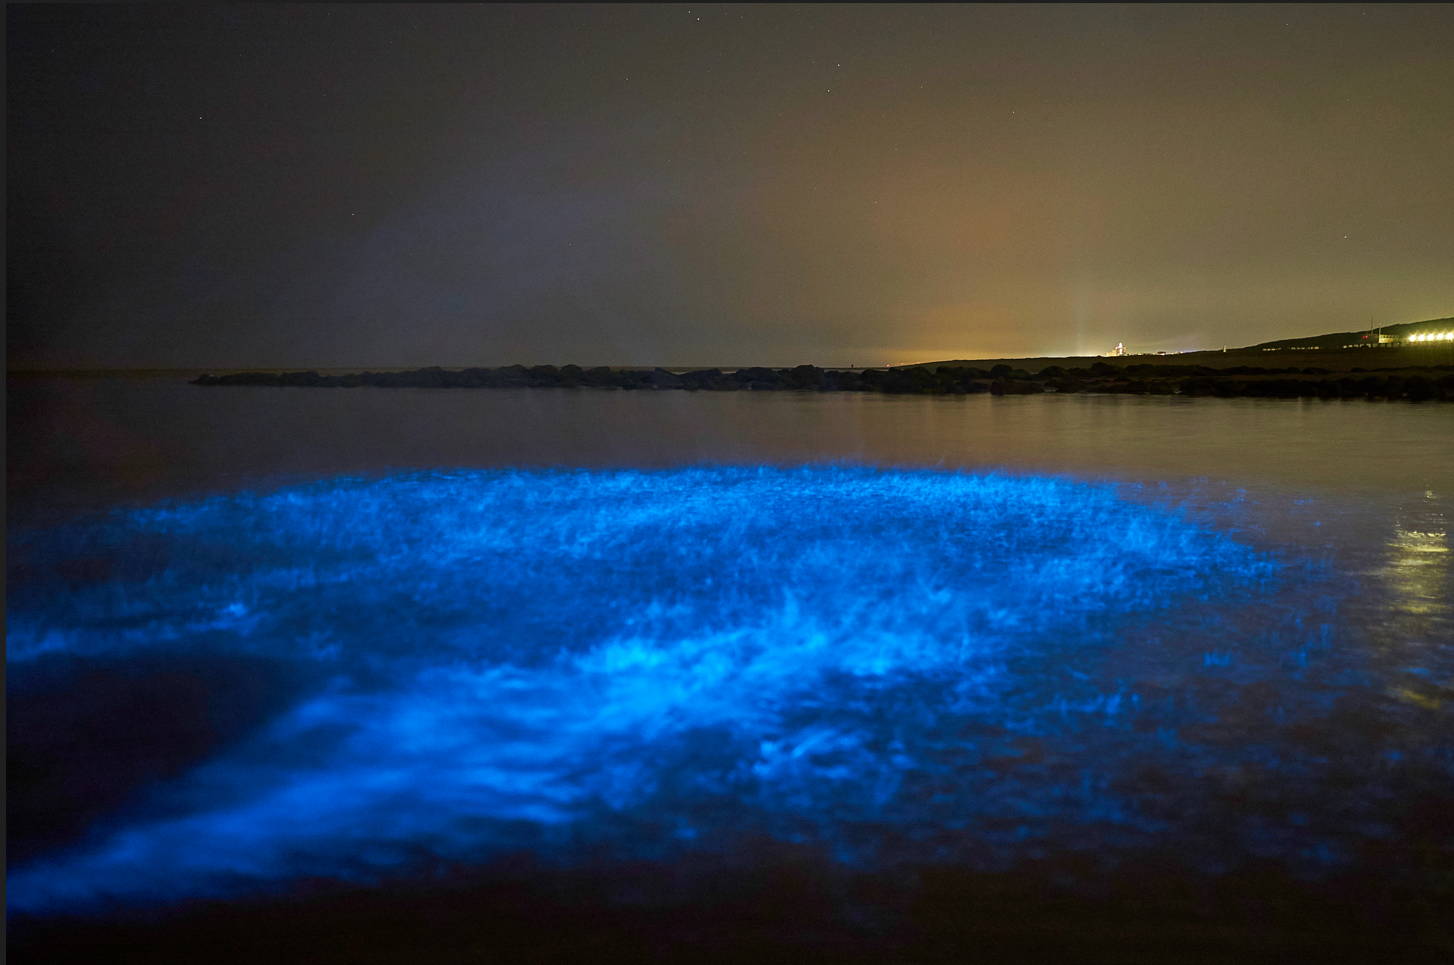 Bioluminescence when scuba diving in the Netherland 